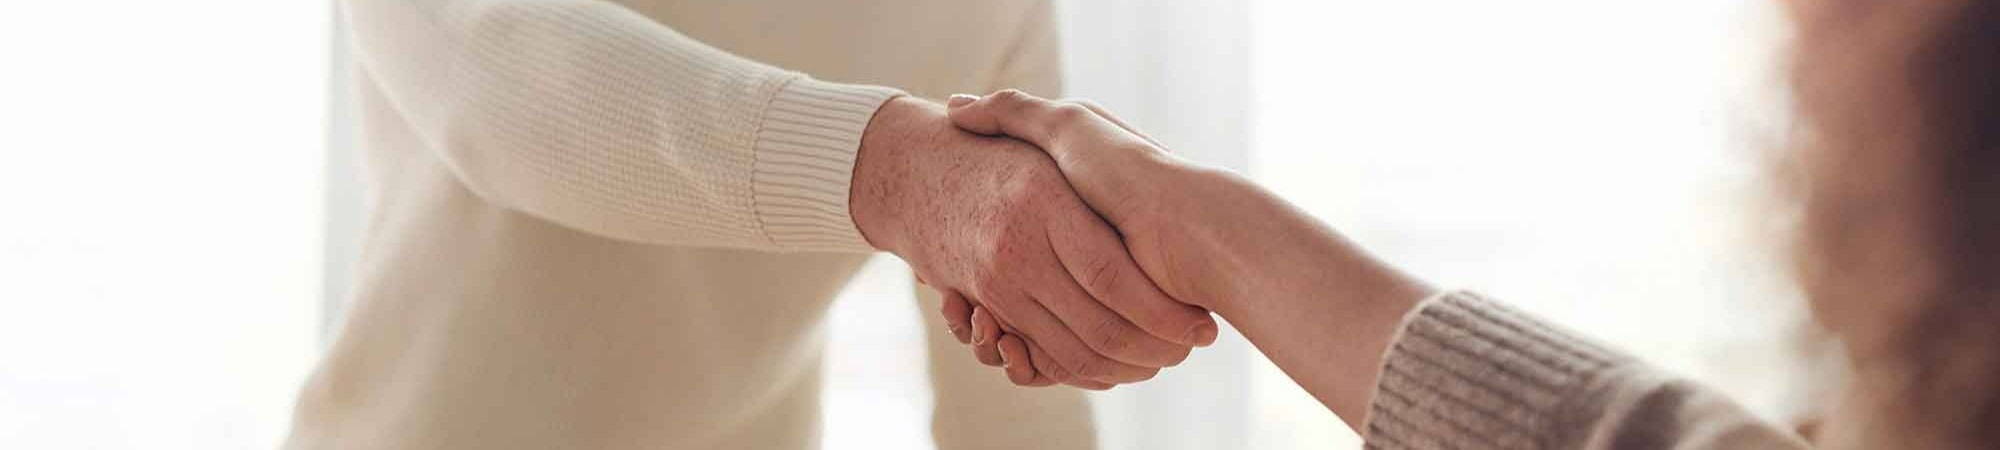 man and woman shaking hands in interview